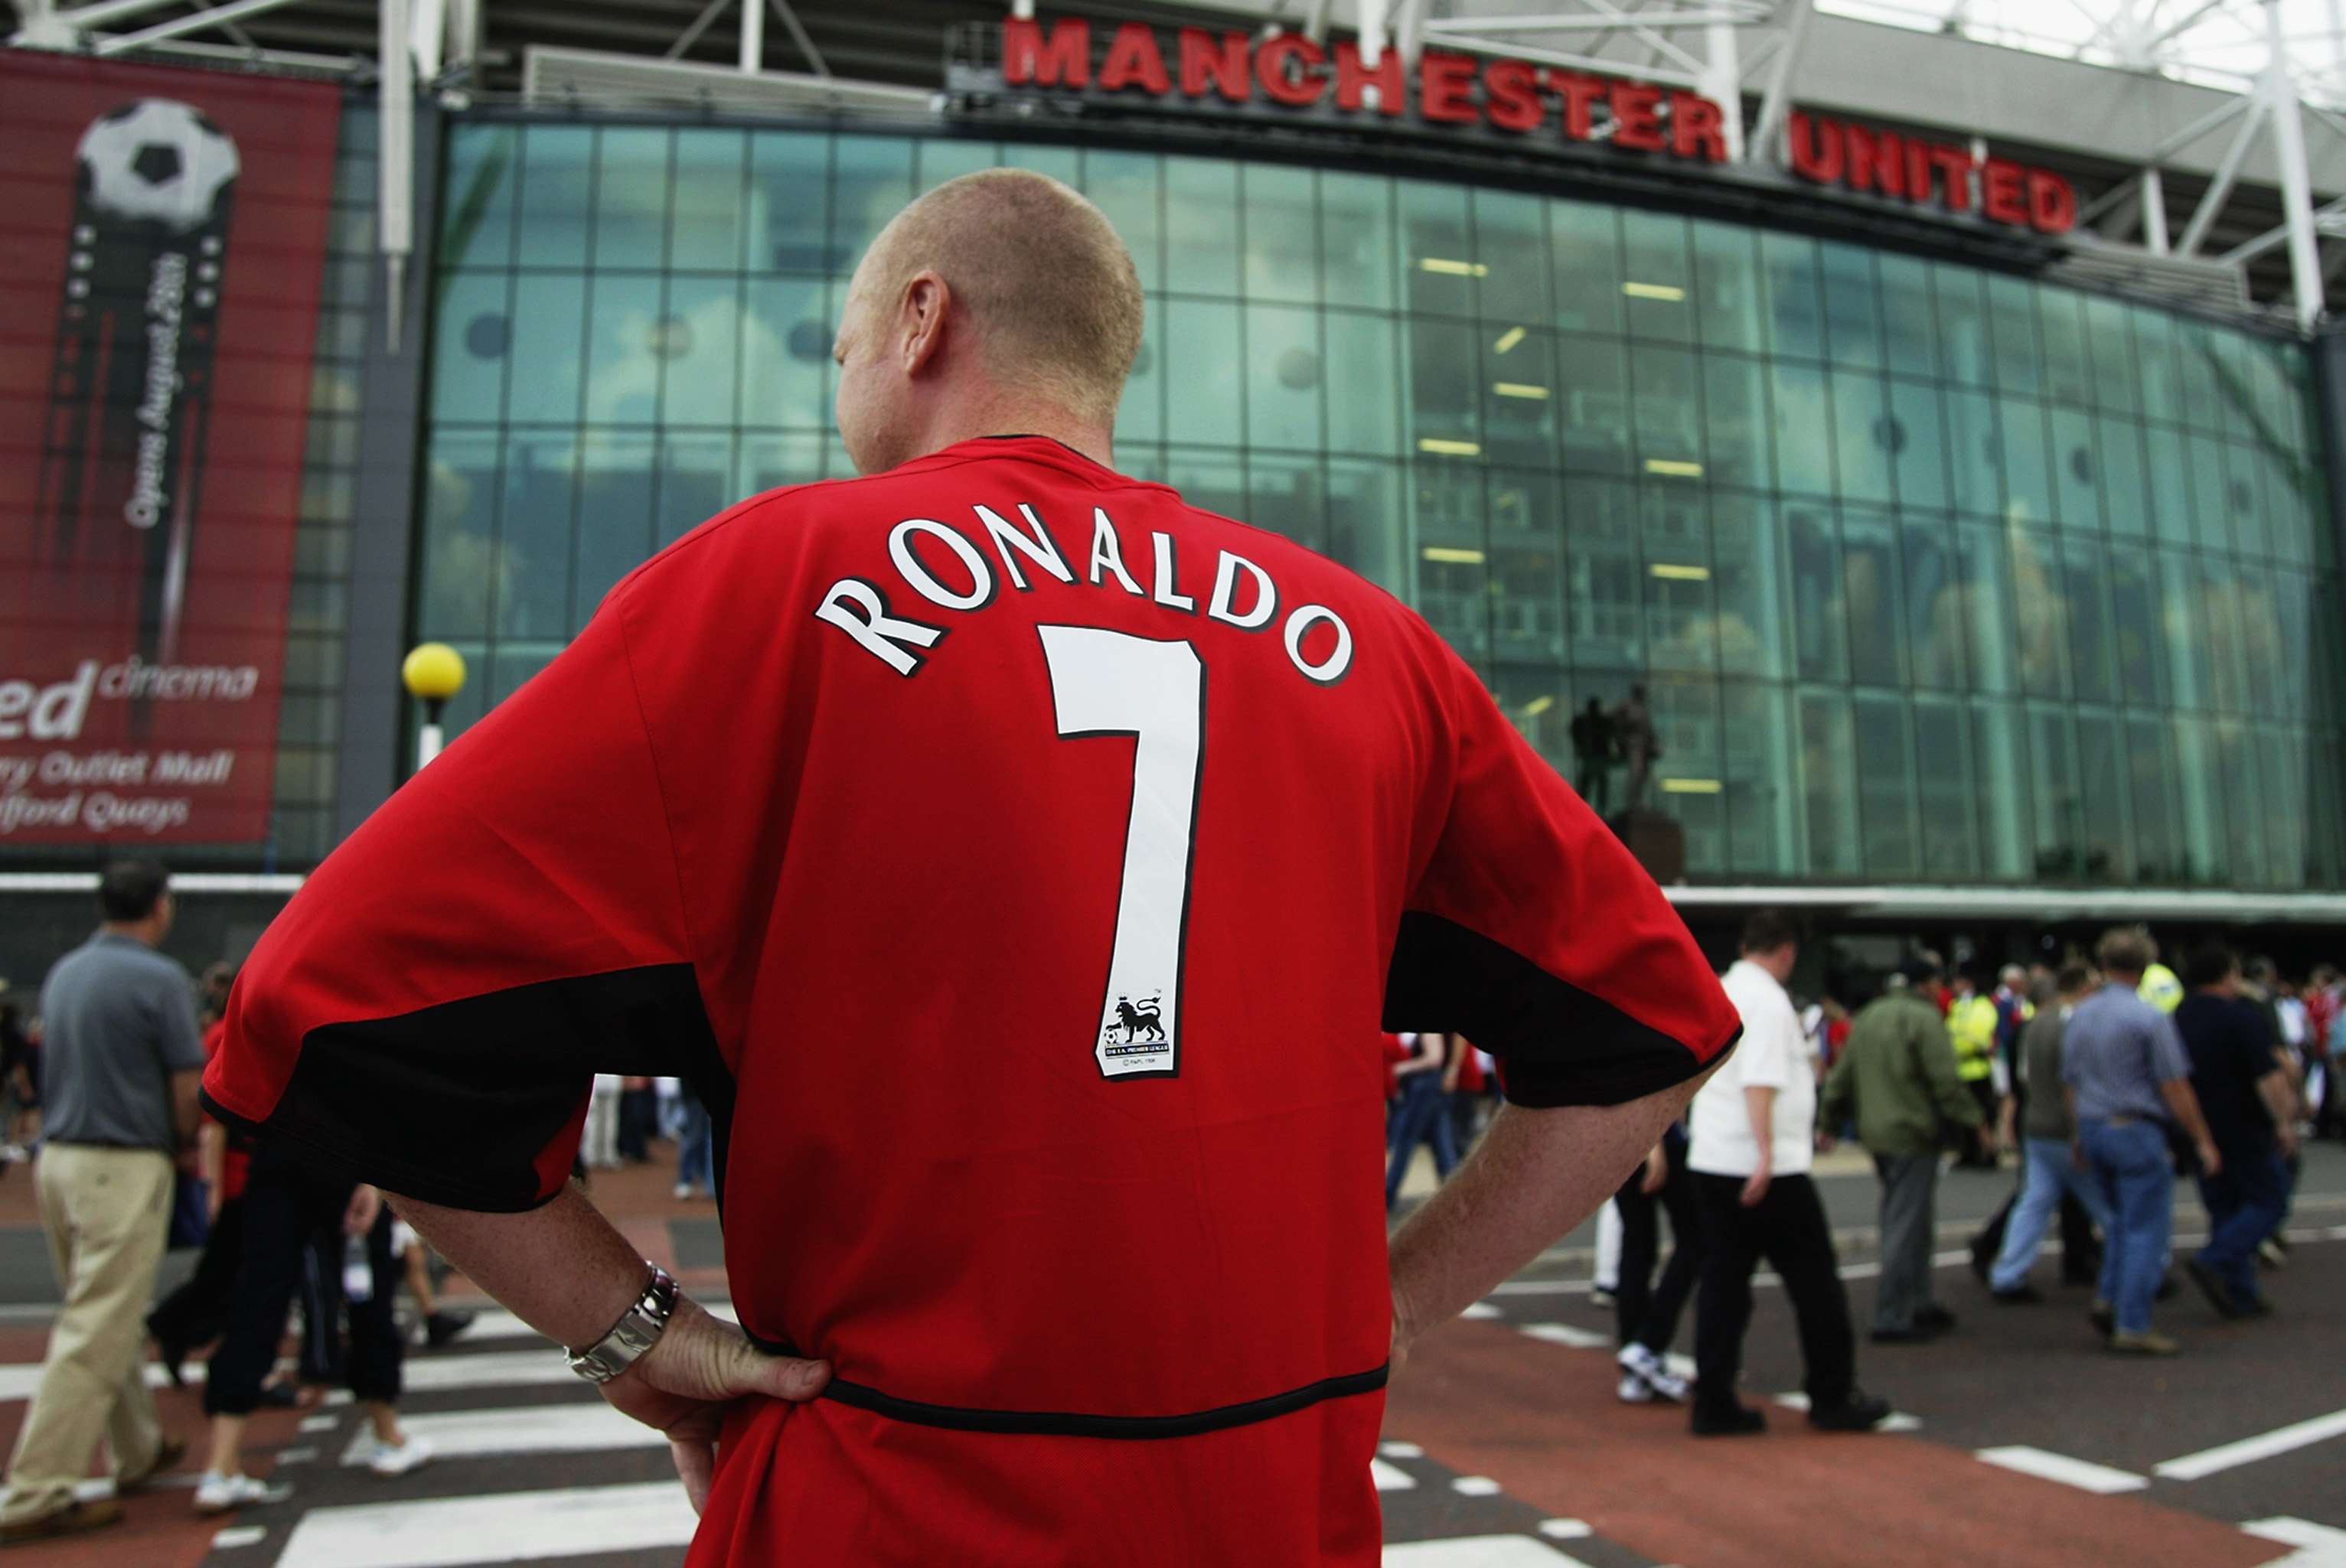 Manchester United always had a special place in my heart —Ronaldo